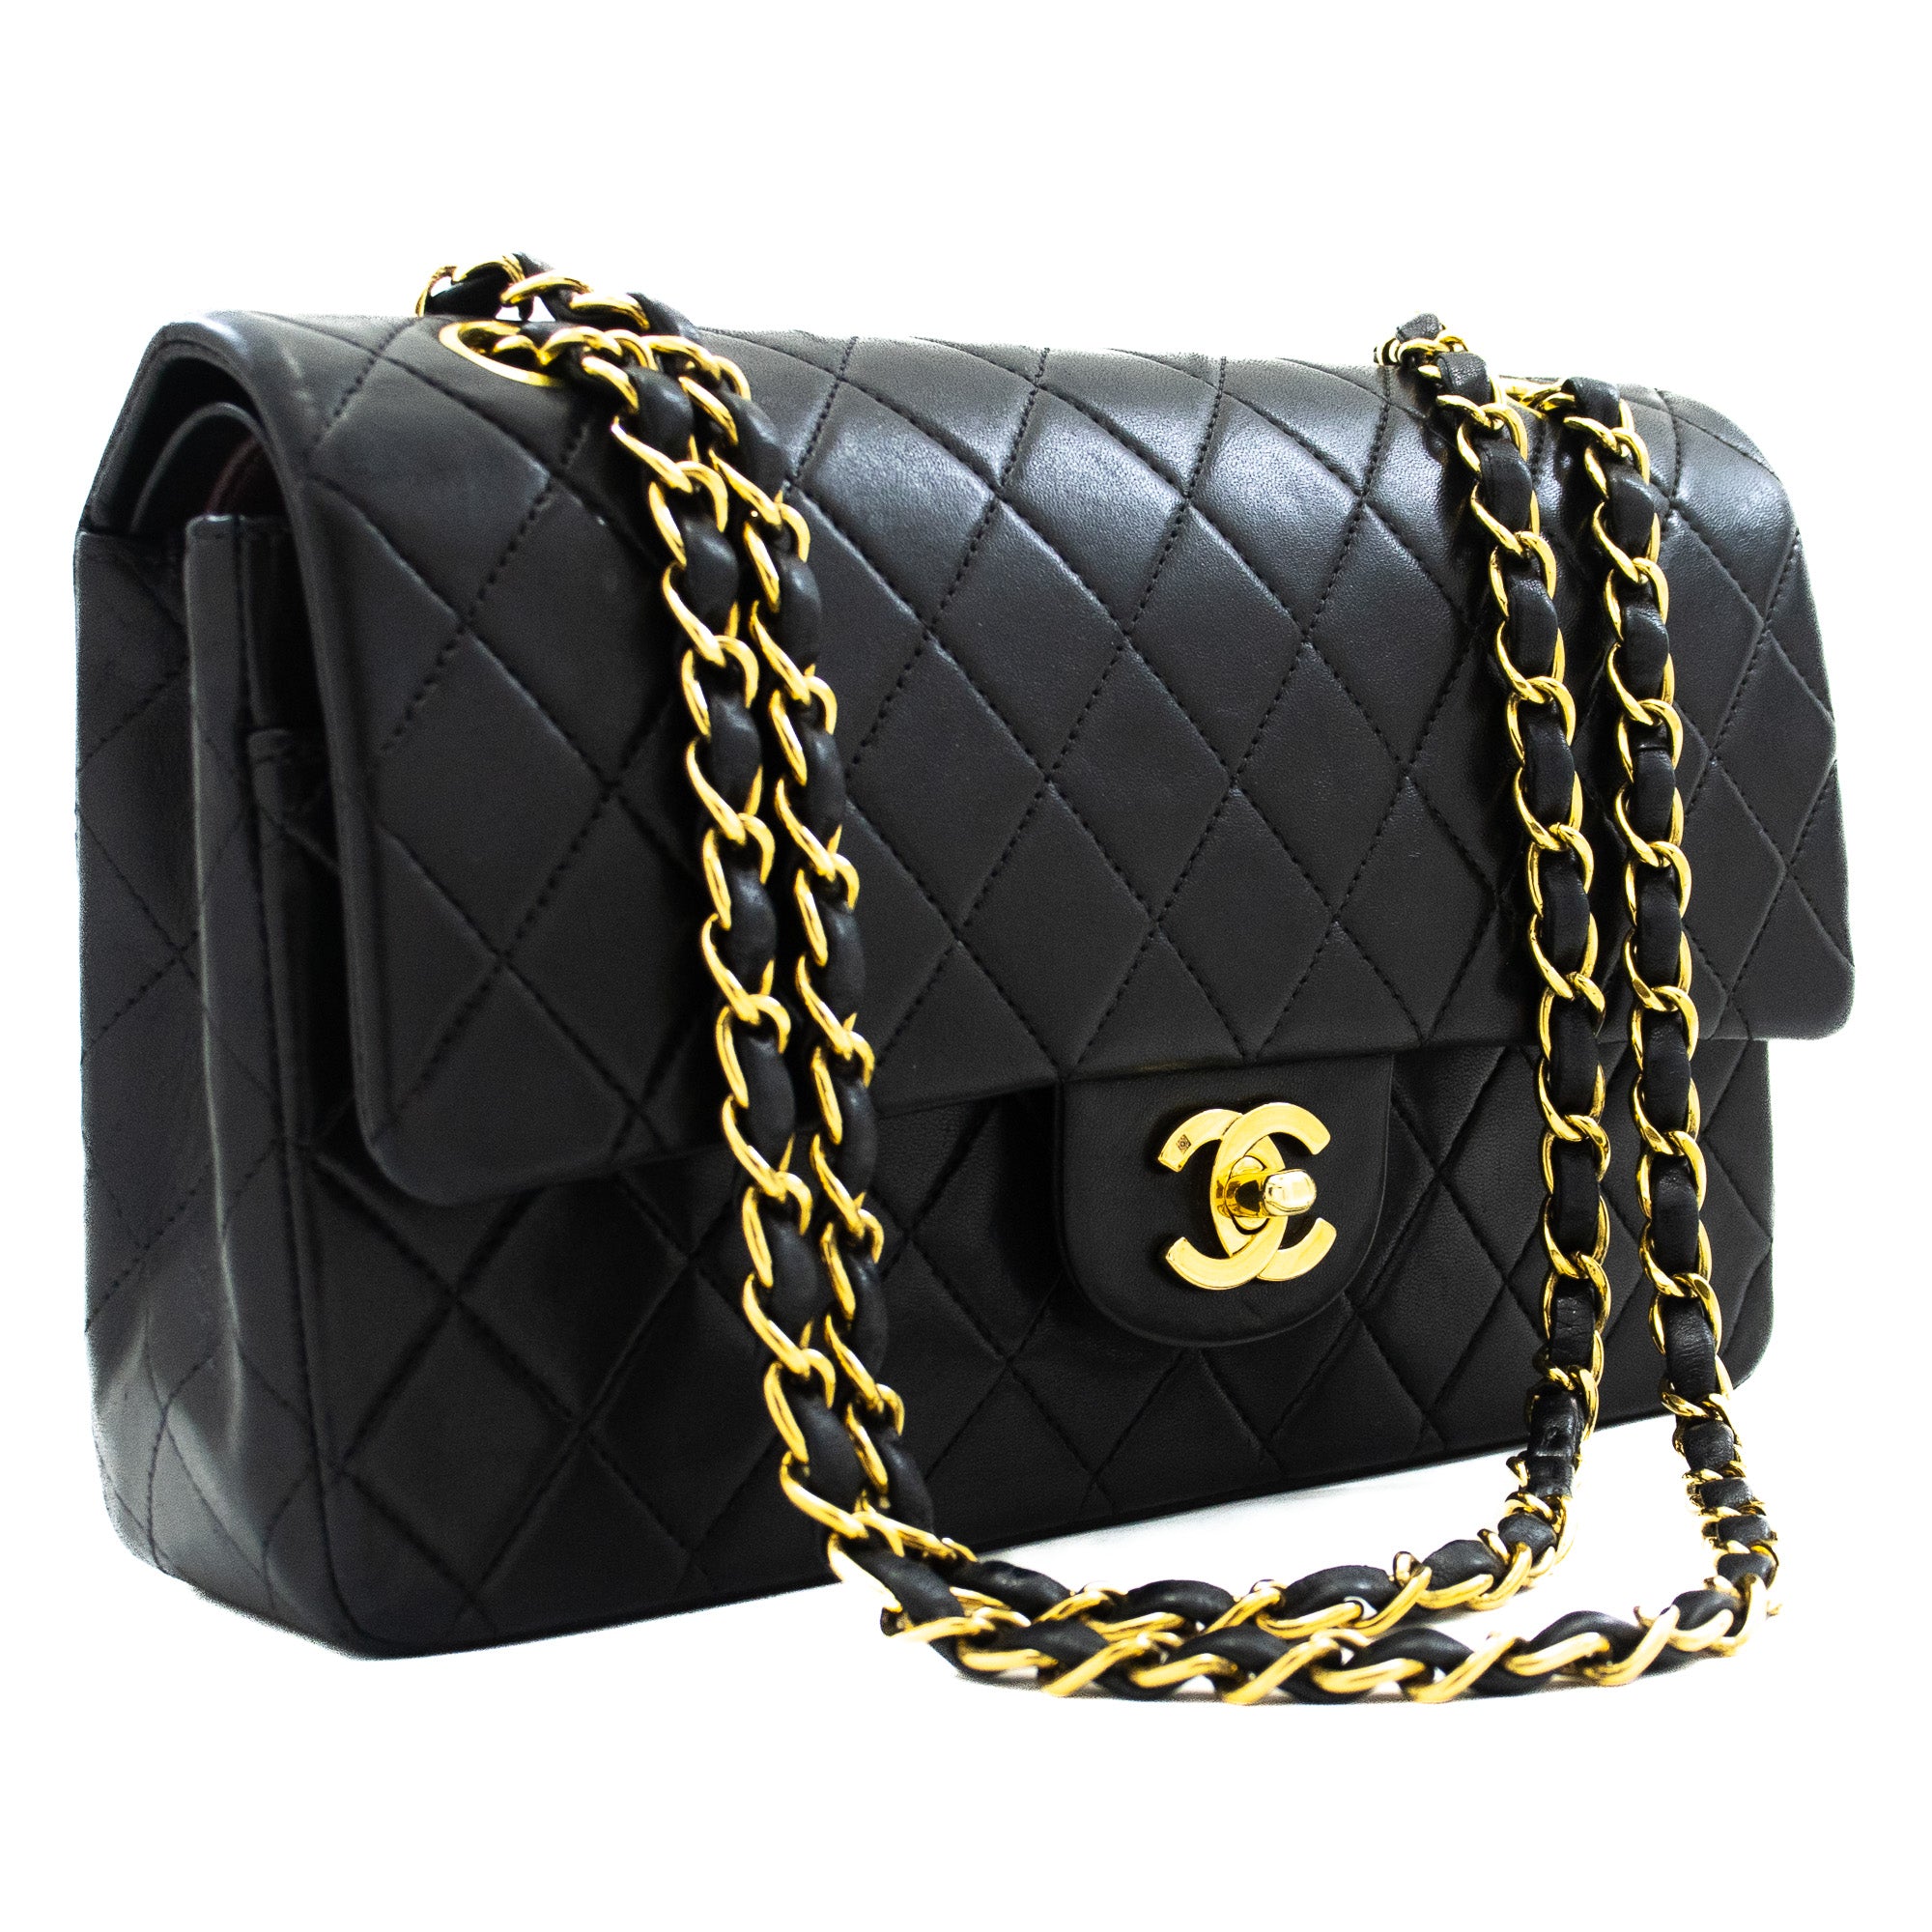 Chanel // Red Quilted Leather 2.55 Shoulder Bag – VSP Consignment